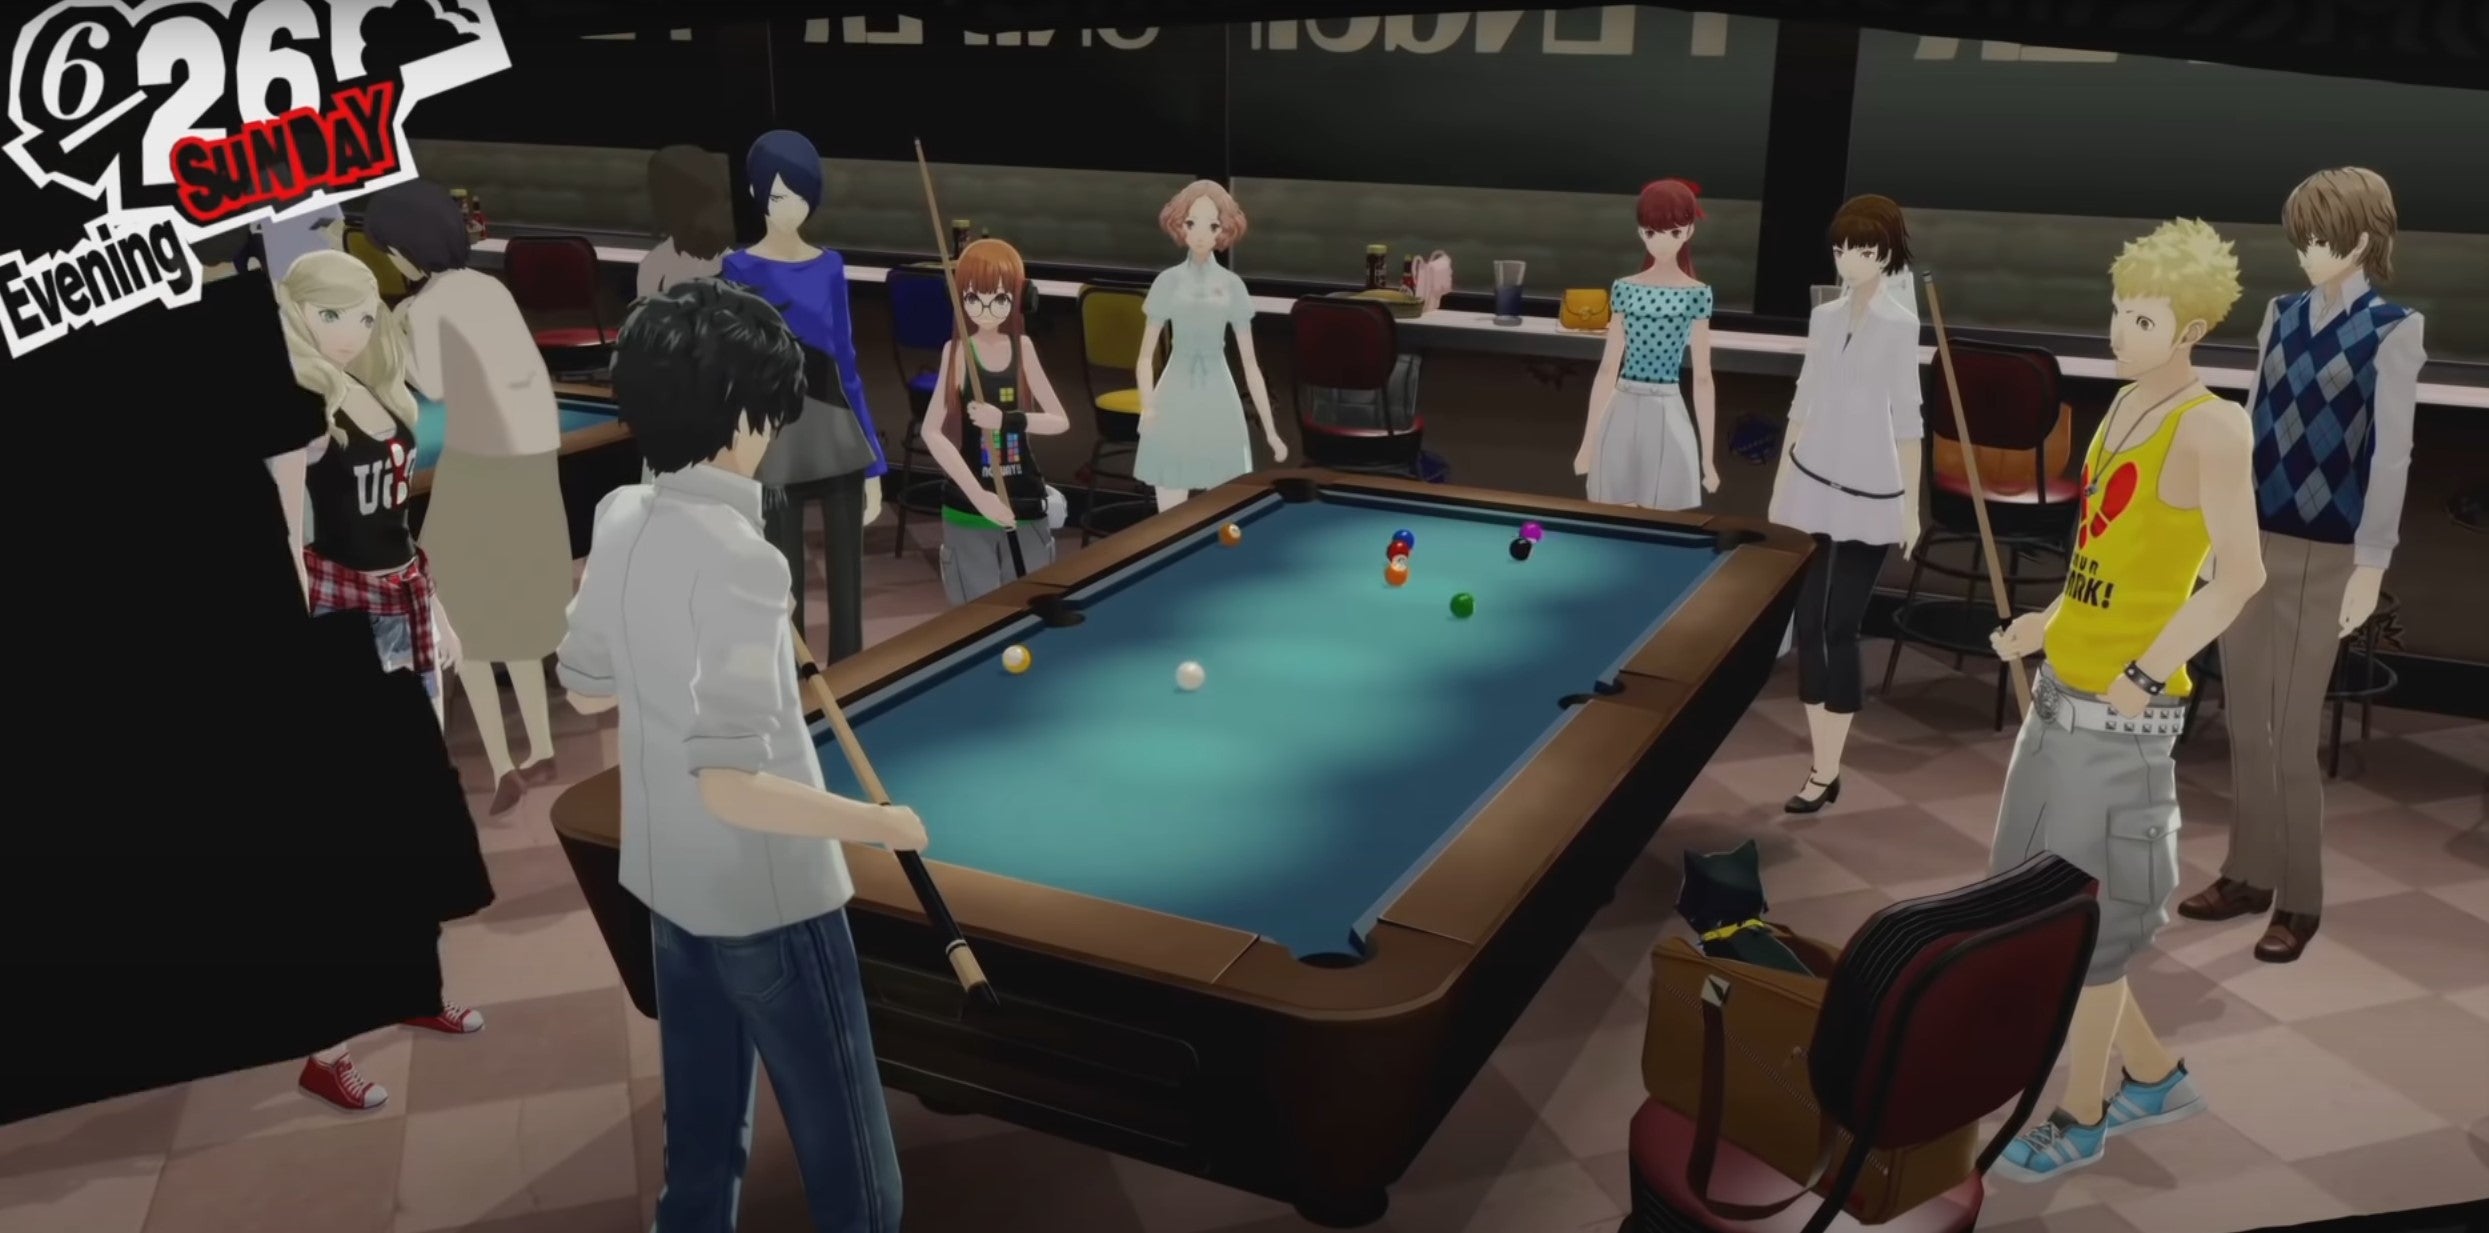 Playing billiards with friends in Persona 5 Royal.